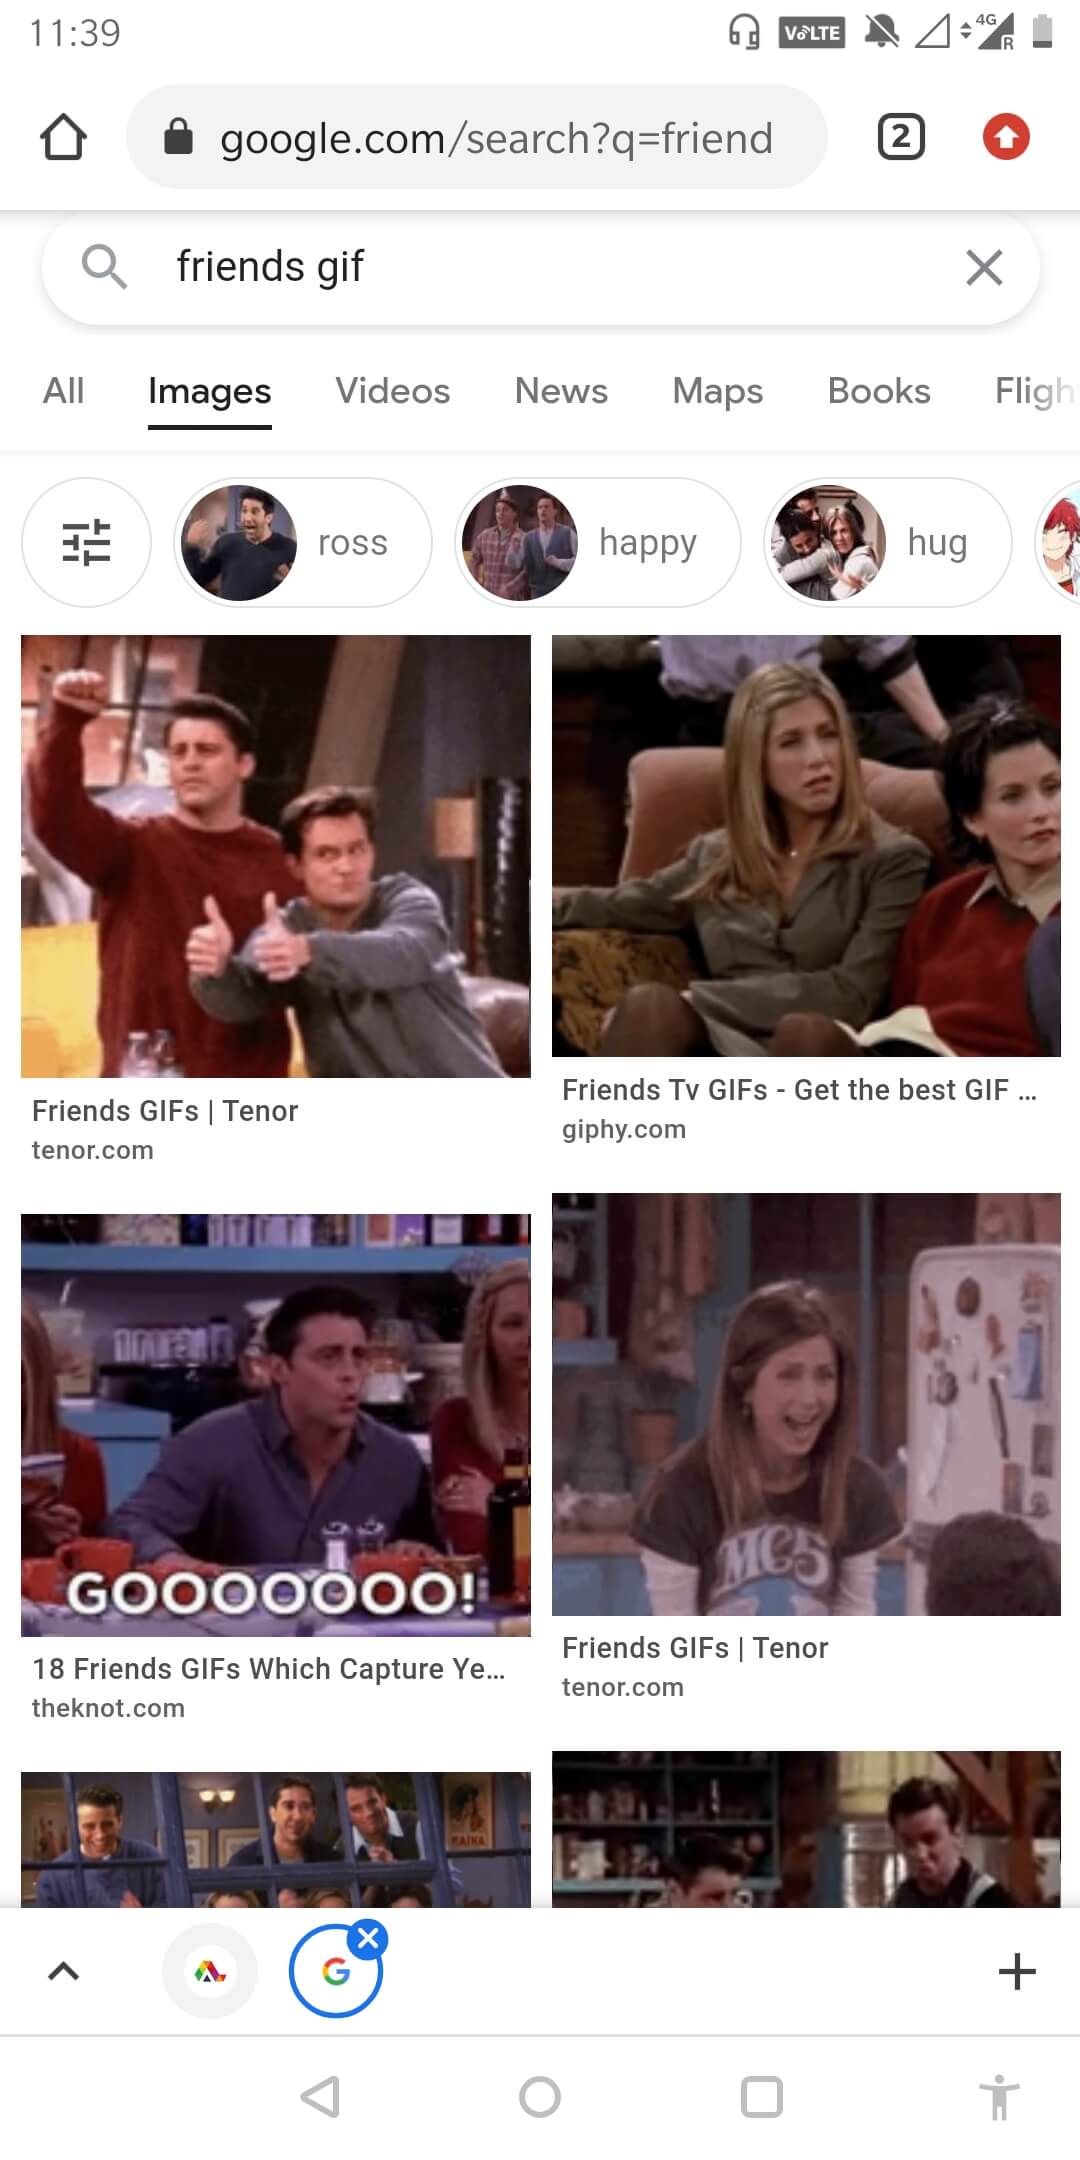 Go to Google.com and tap on Images then in the search bar, type the GIFs that you want to look up